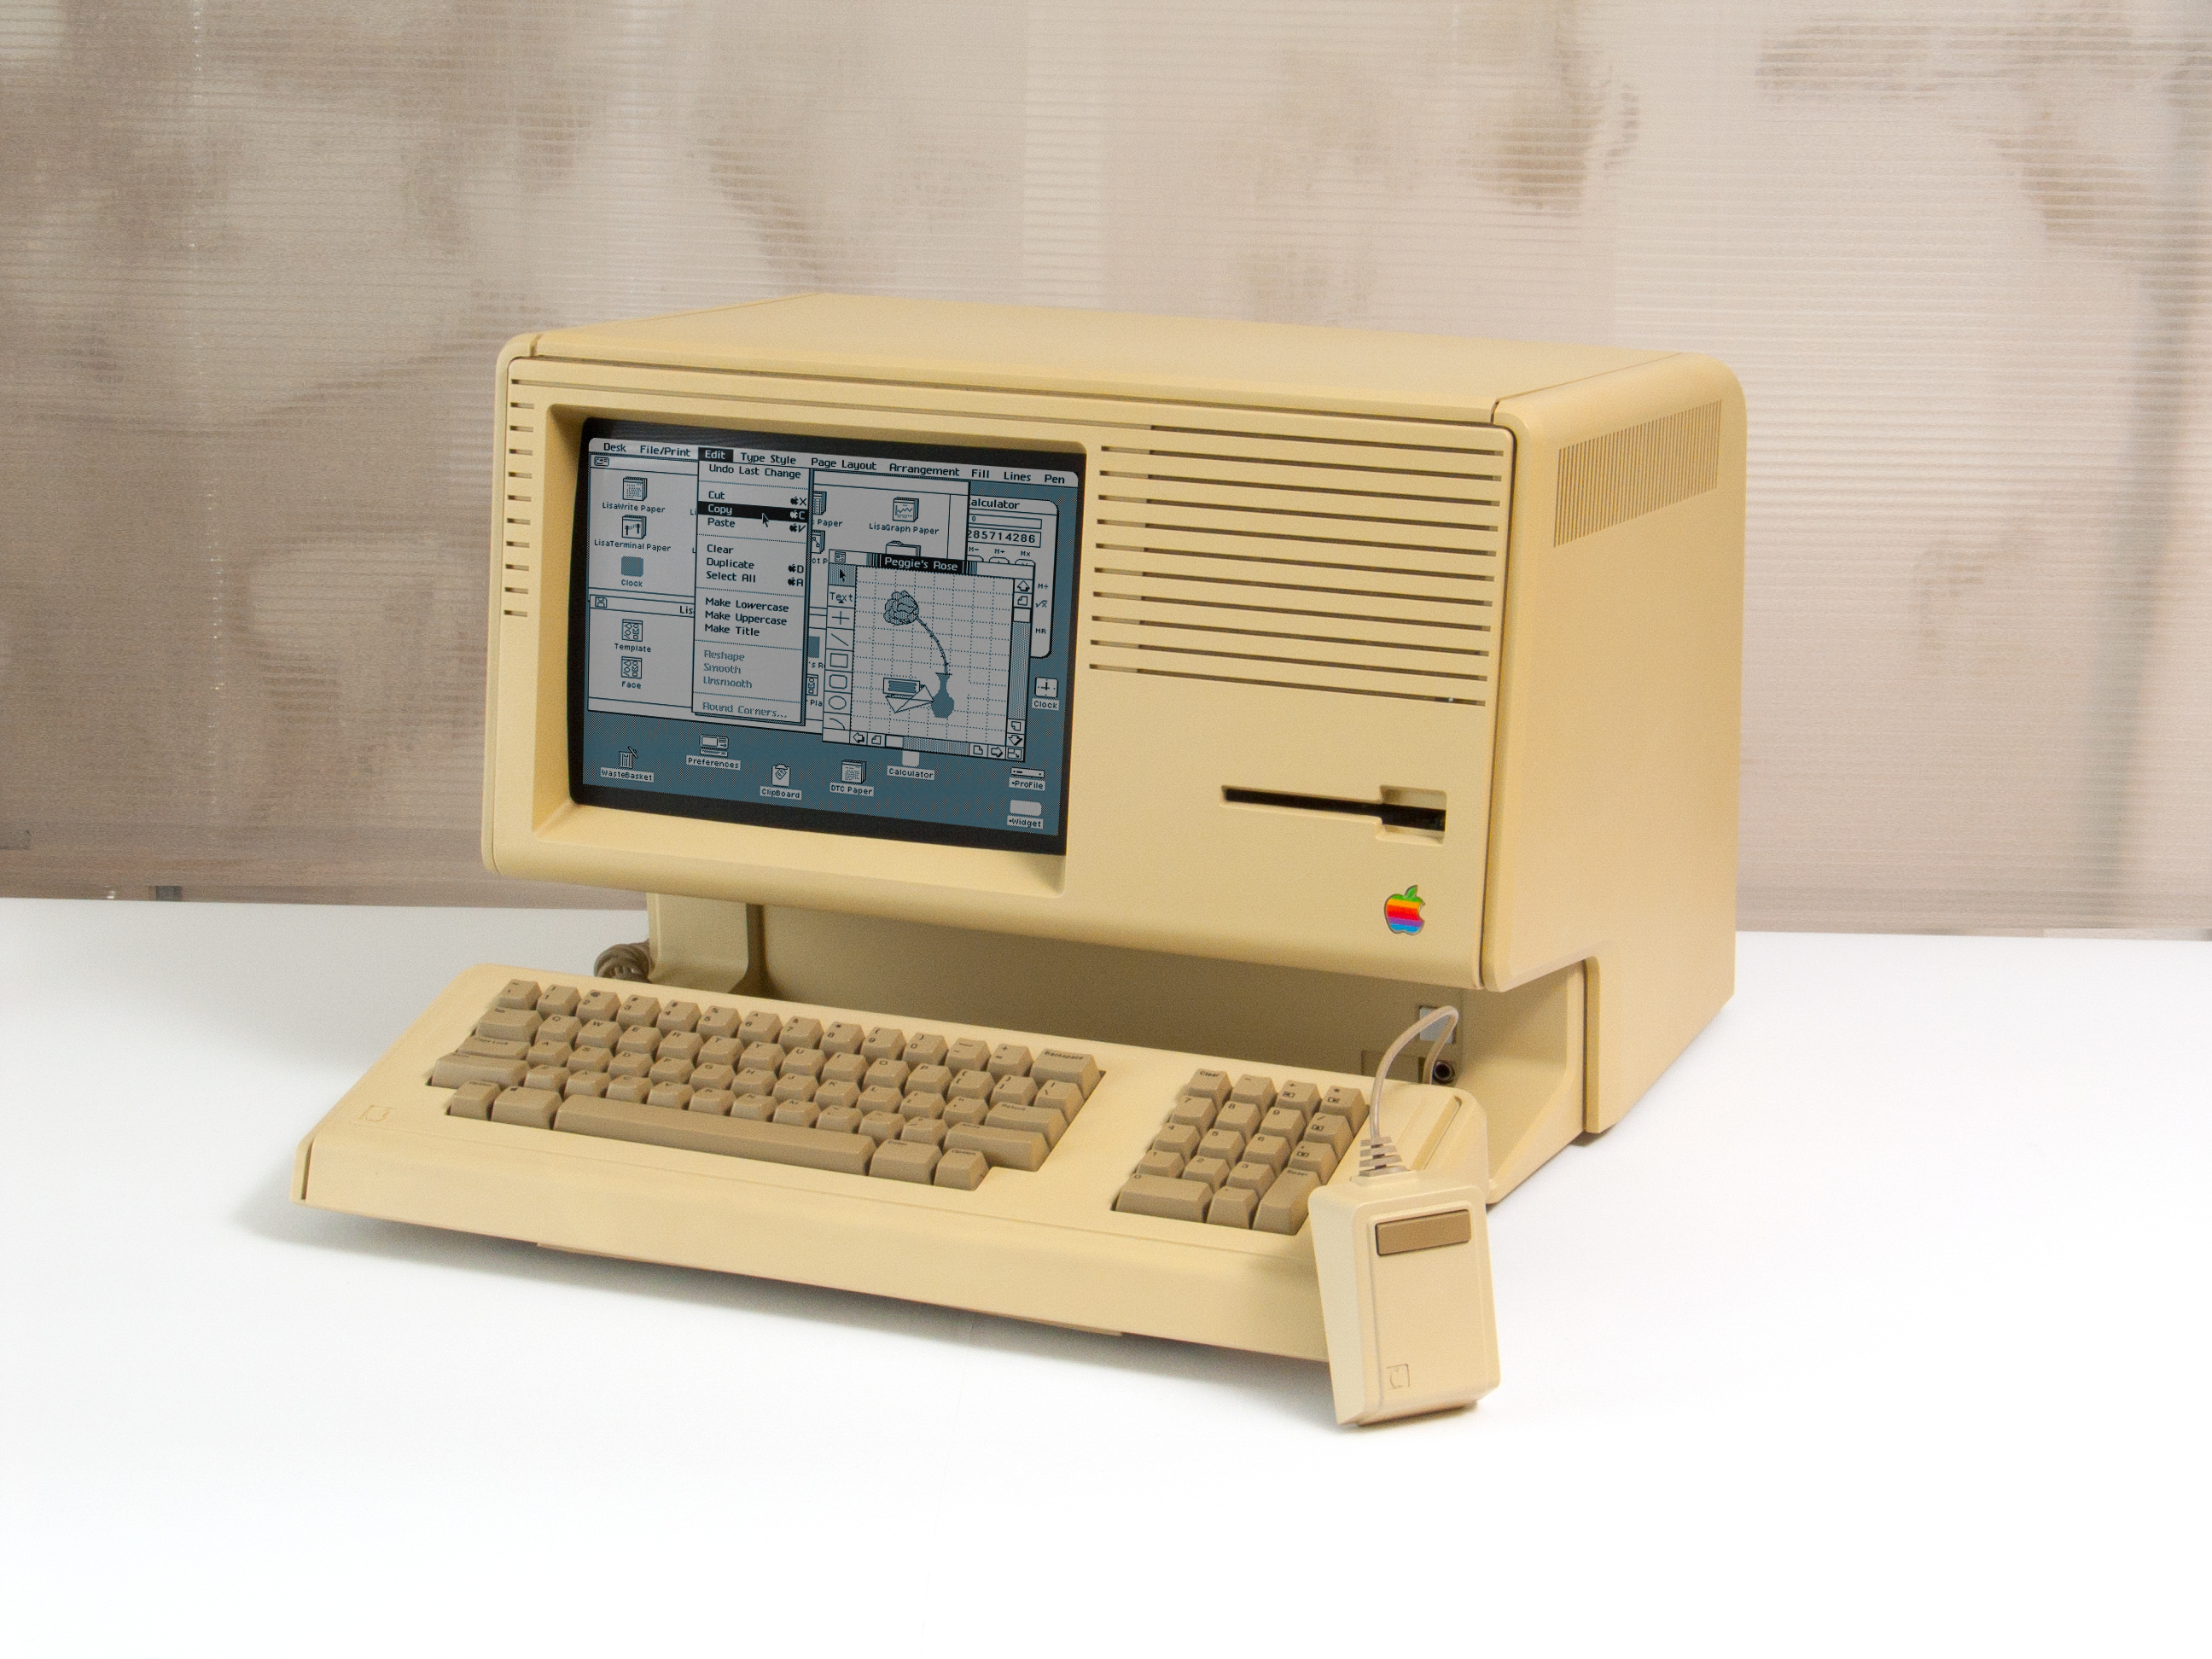 Apple LISA II Macintosh-XL, one of the first commercially available graphical user interface computers.